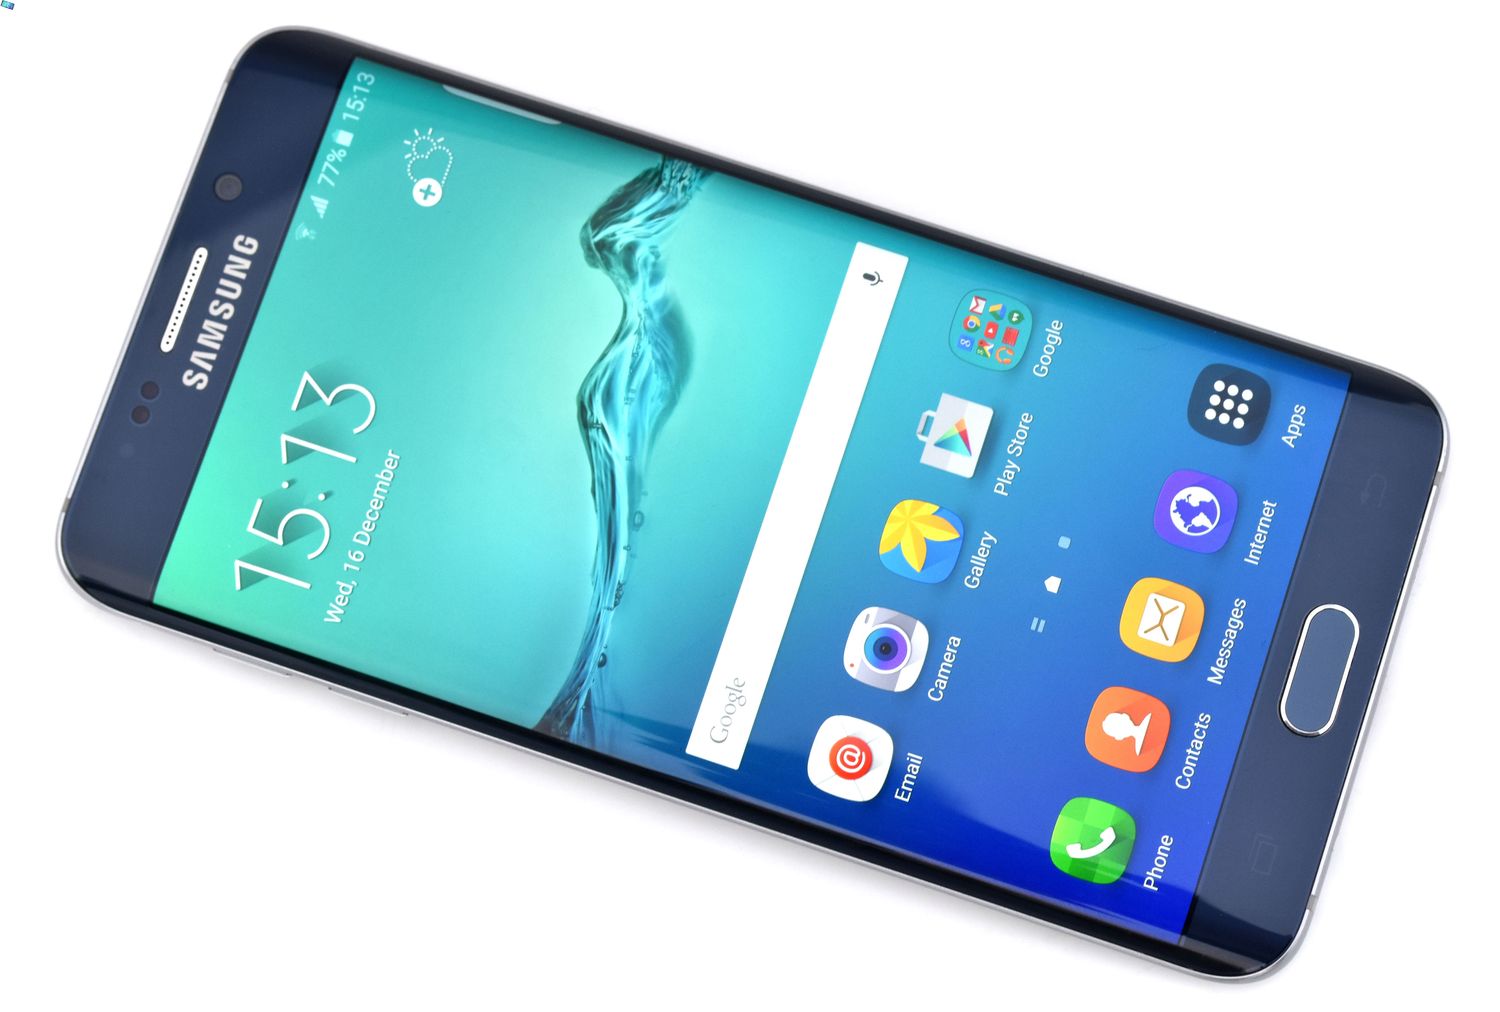 what-is-the-phone-icon-on-galaxy-s6-edge